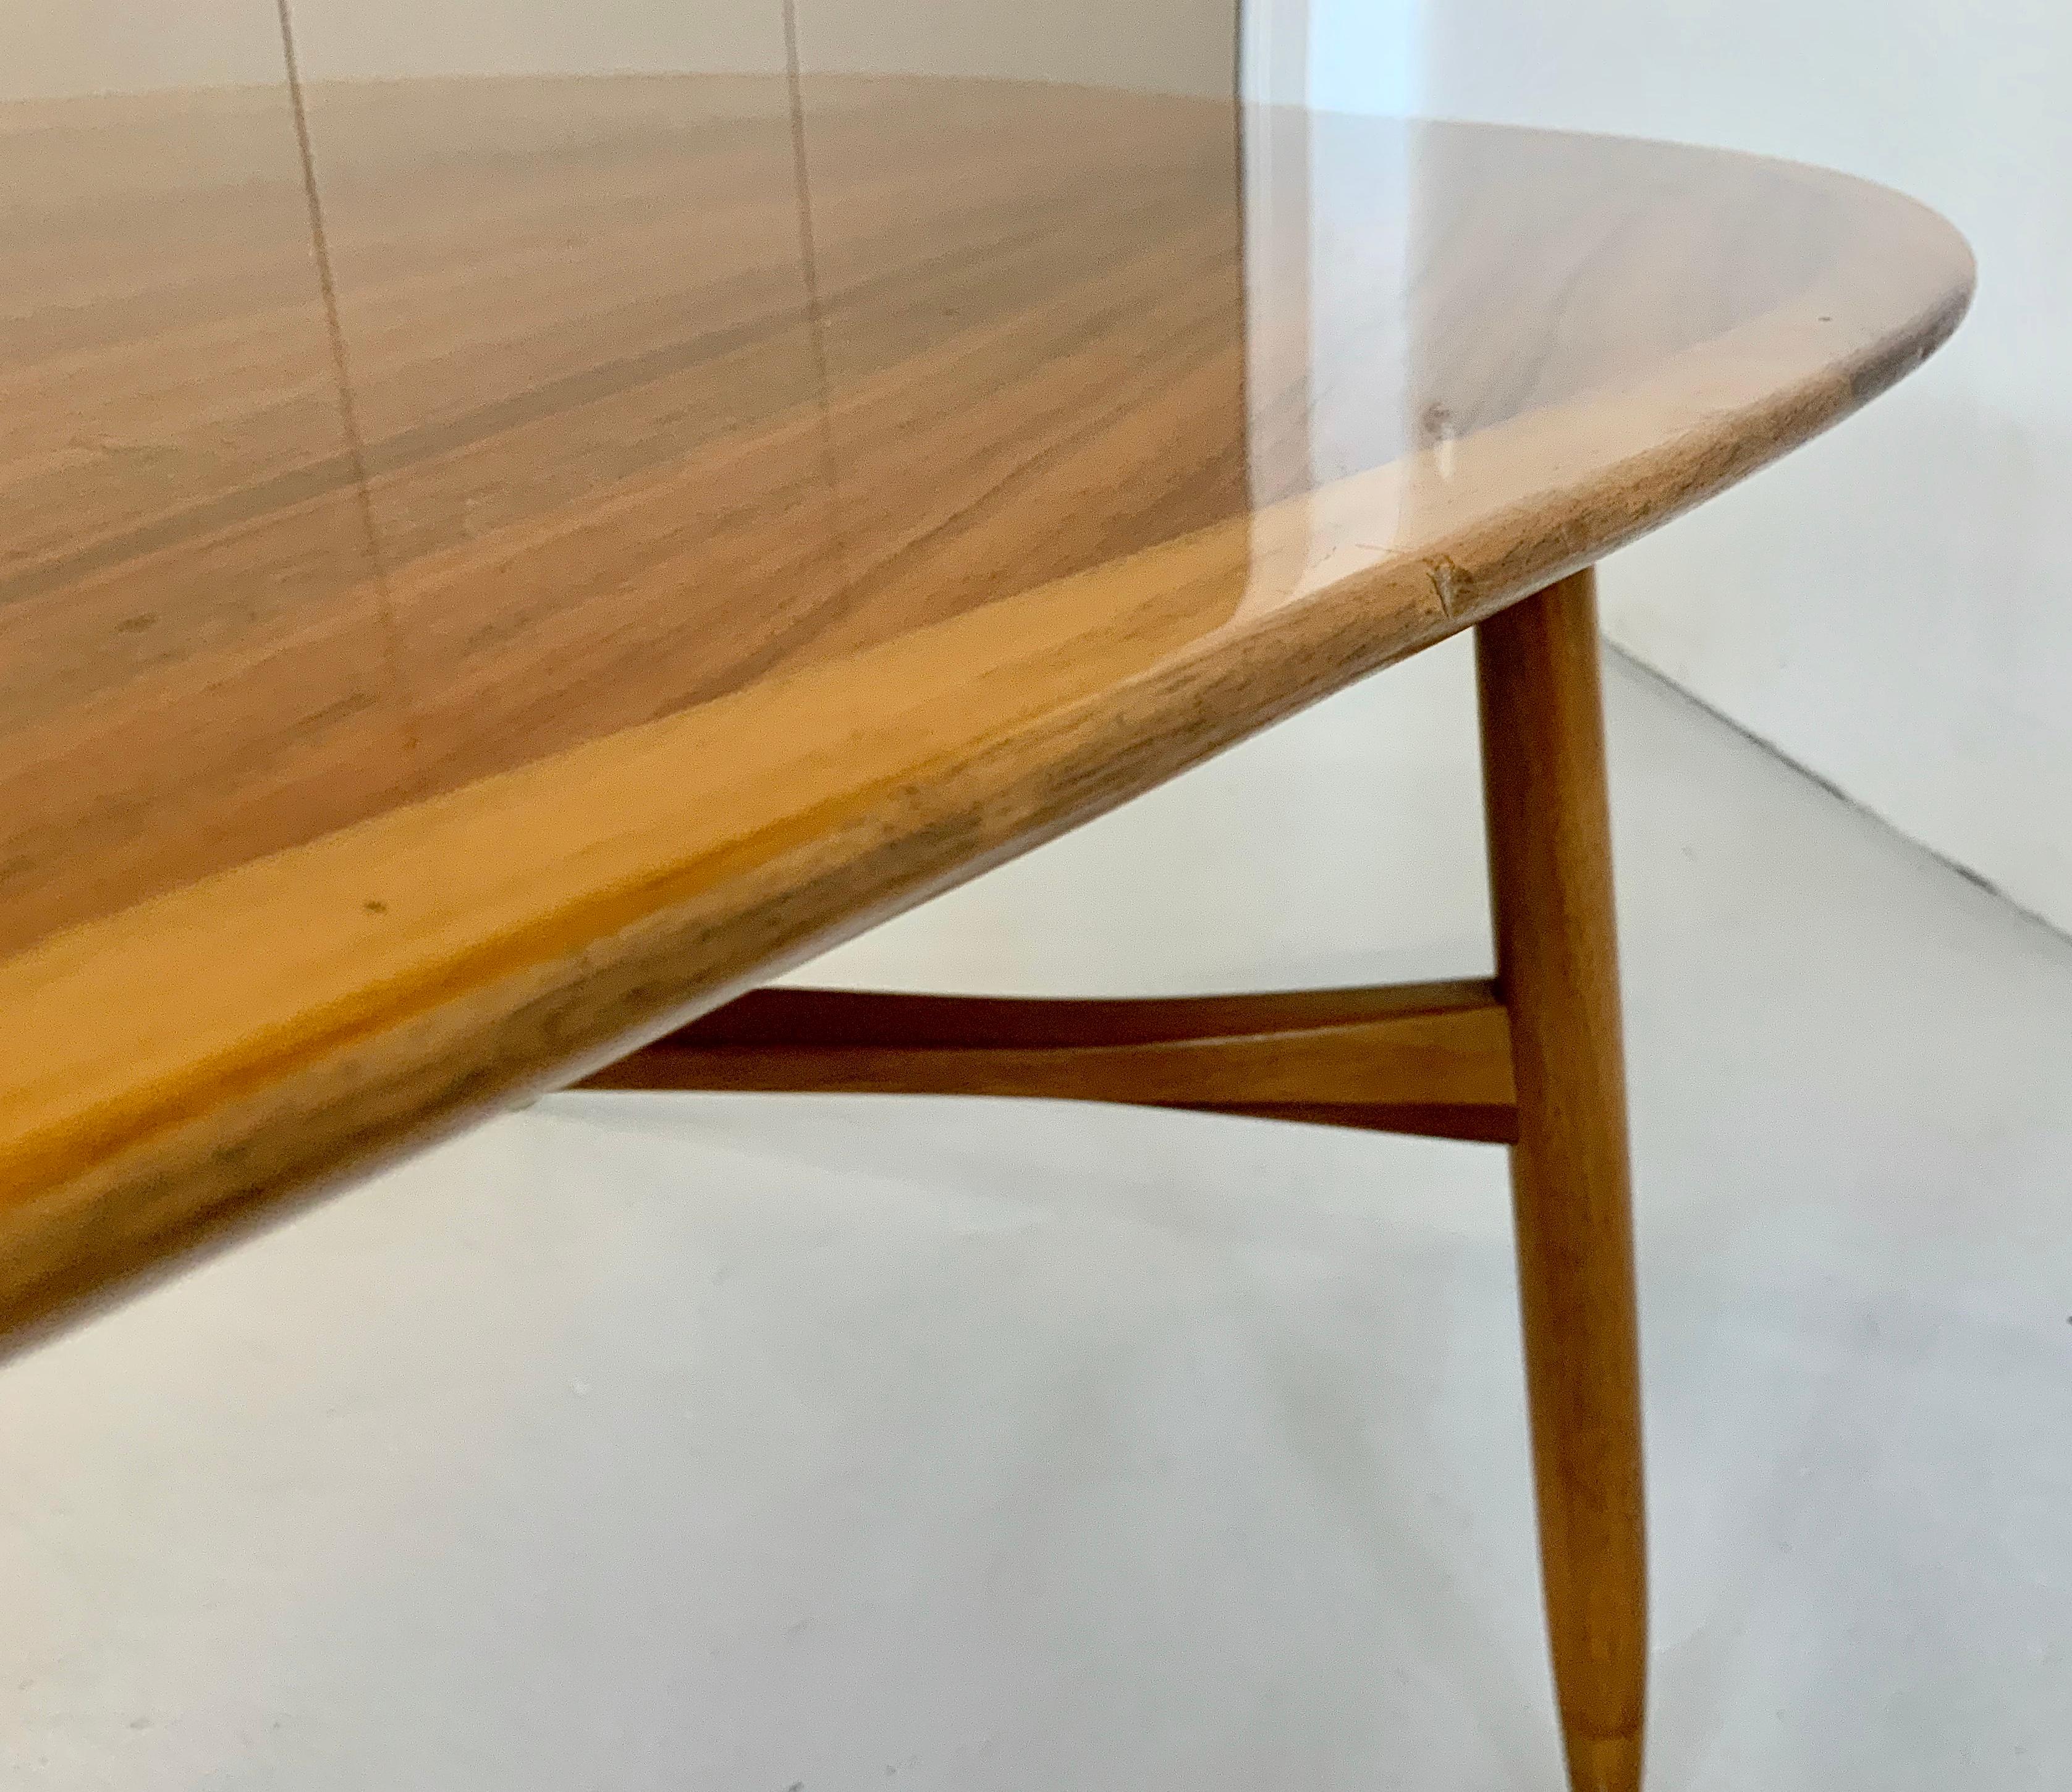 Large Svante Skogh for Laauser Midcentury Walnut Curved Coffee Table, 1950s For Sale 2